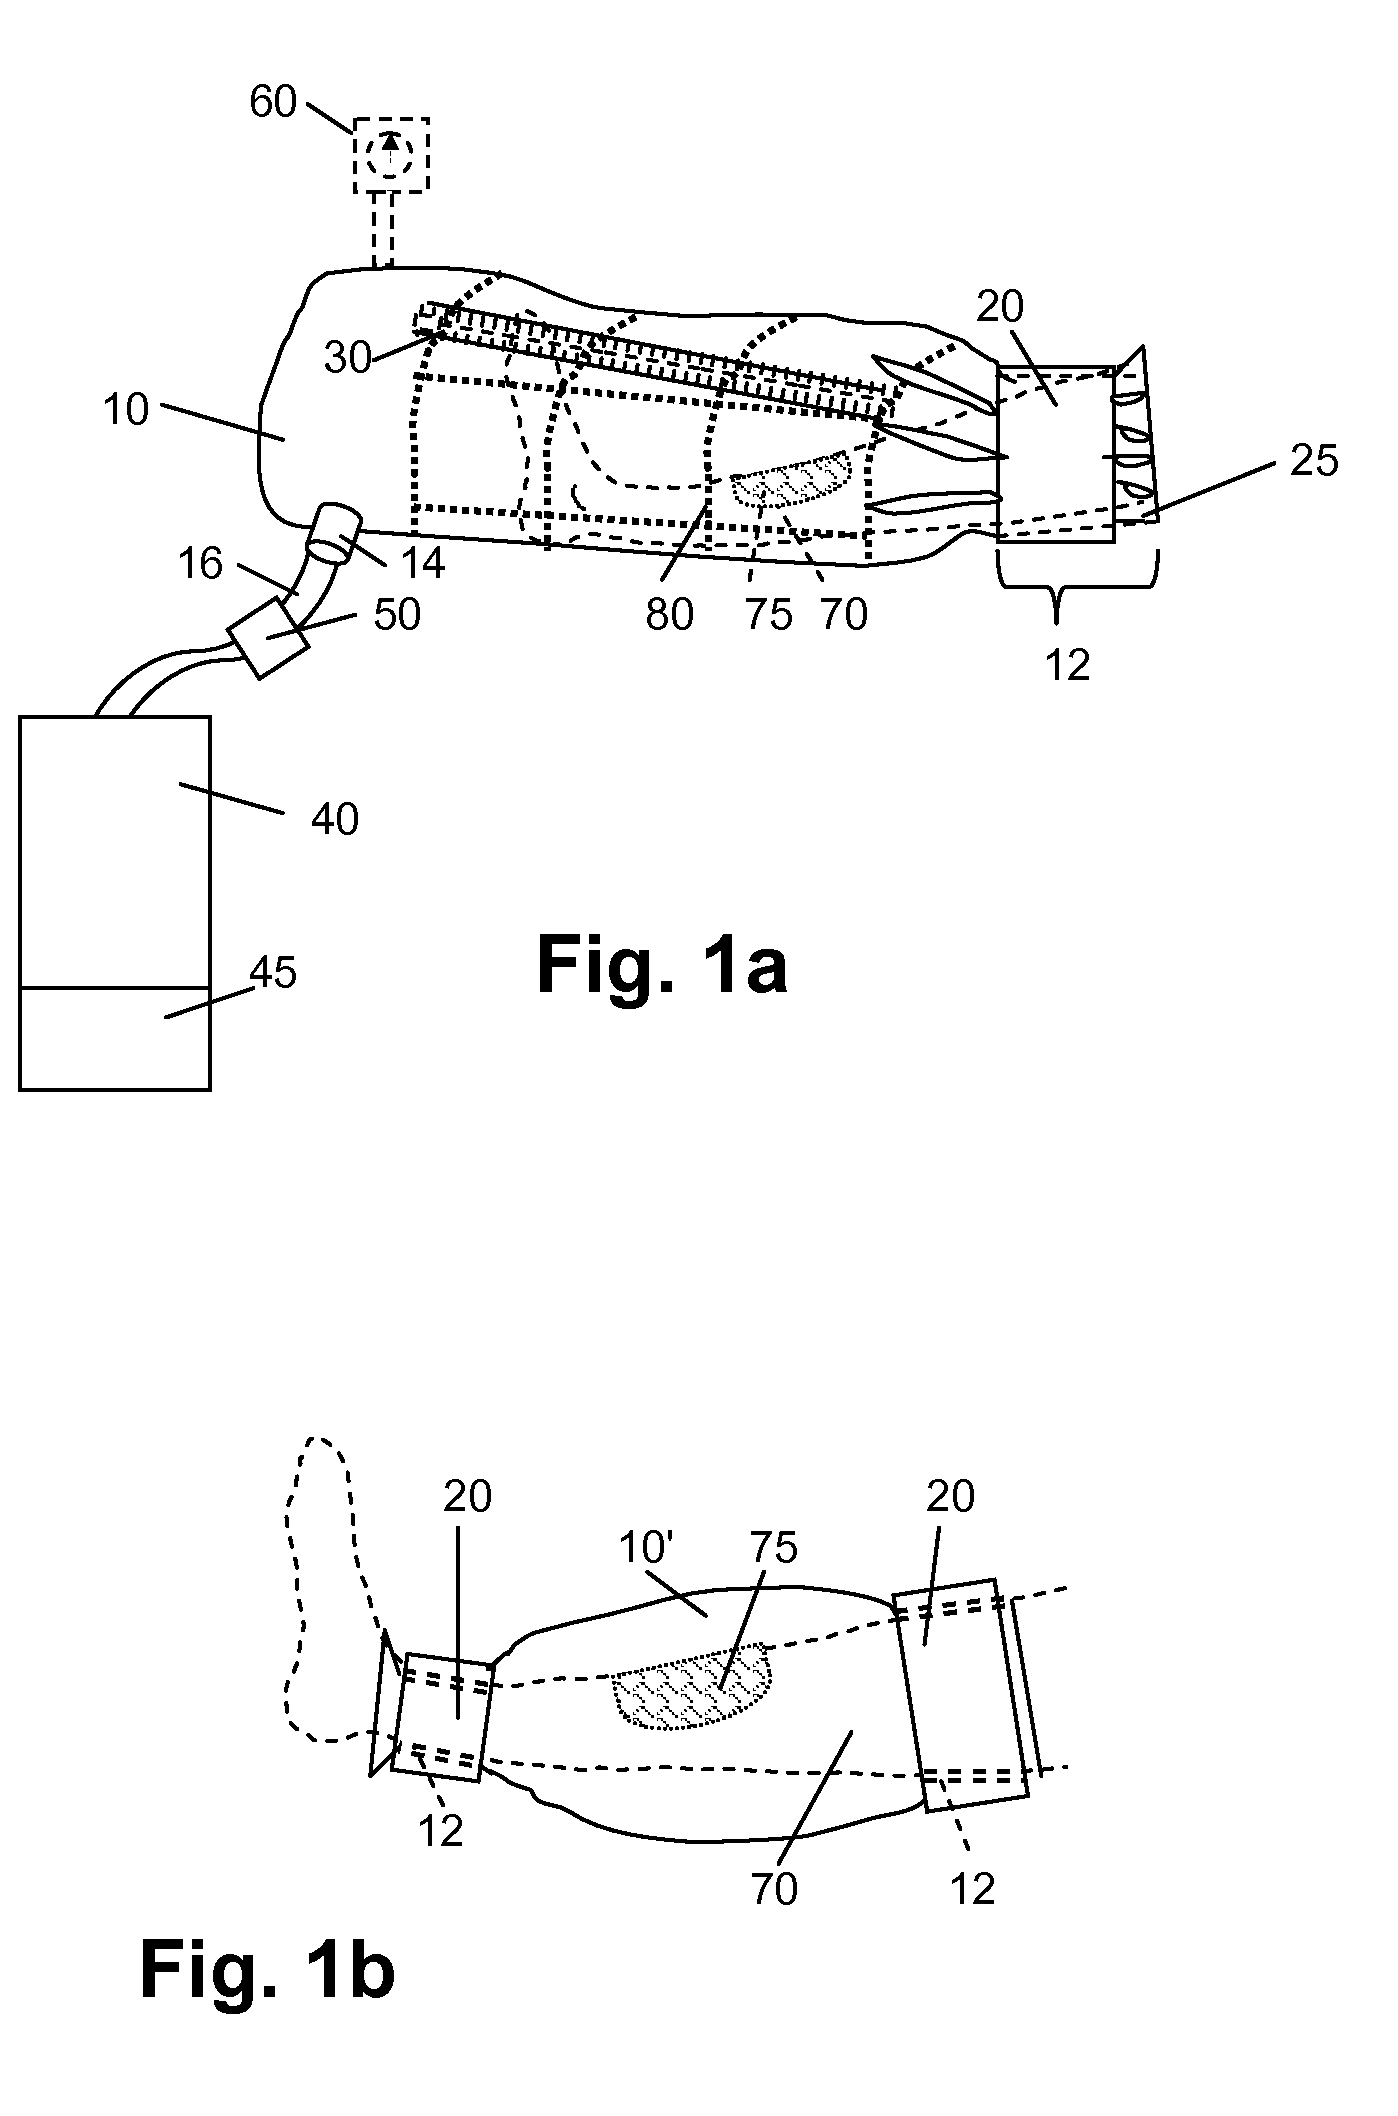 Method and Apparatus for Increasing Blood Flow in a Body Part